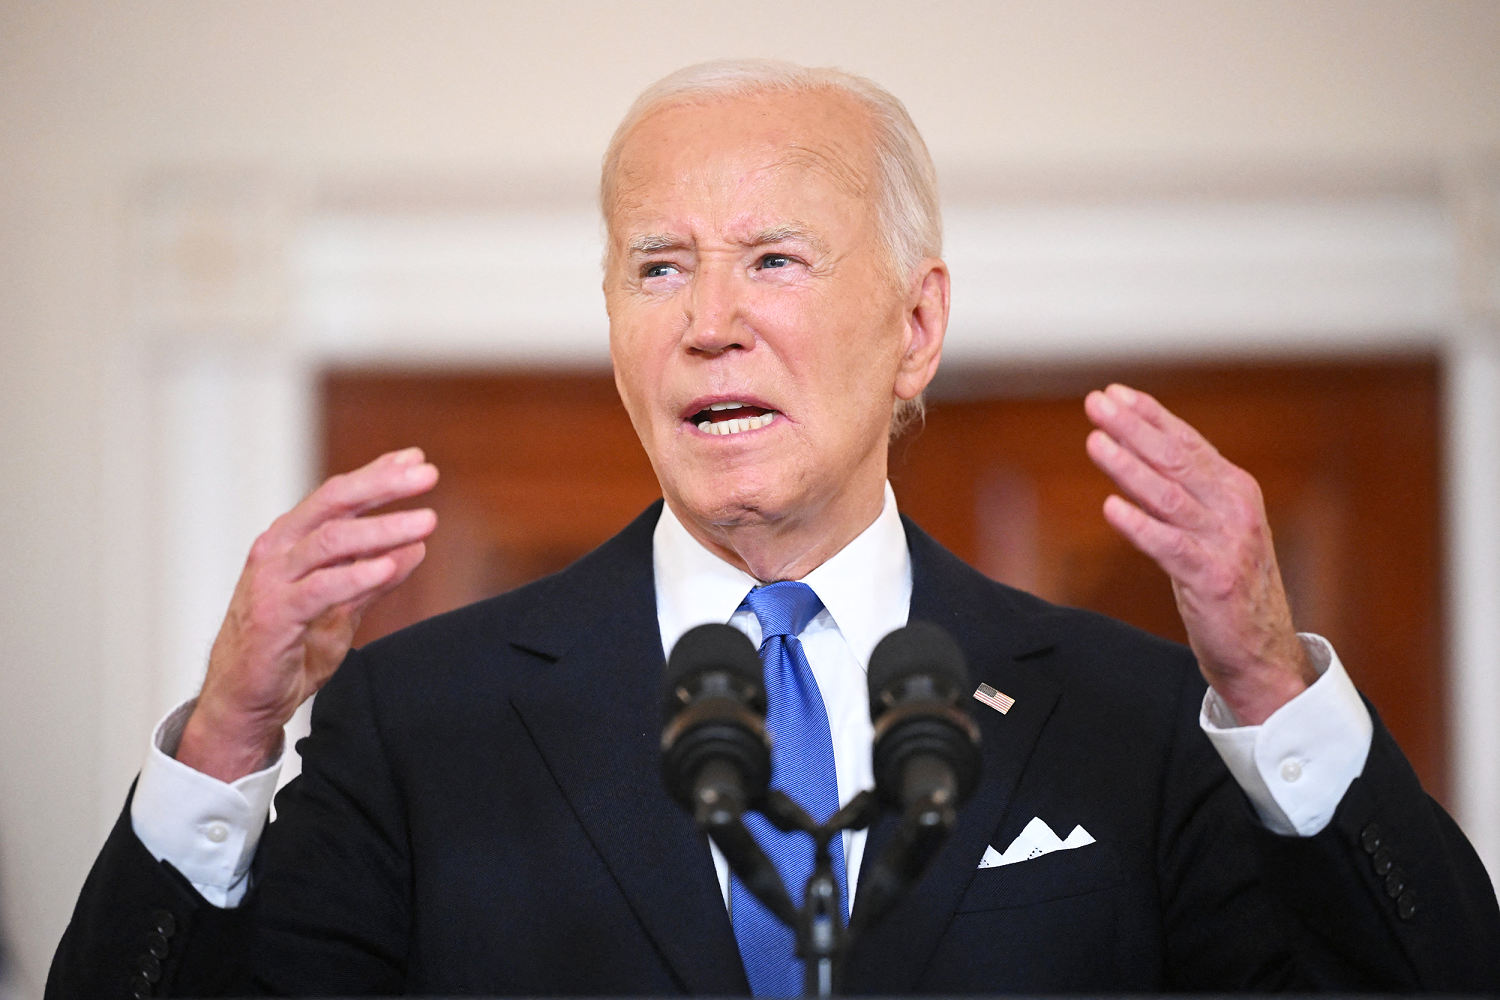 'I dissent': Biden attacks Supreme Court immunity ruling as emboldening a lawless president